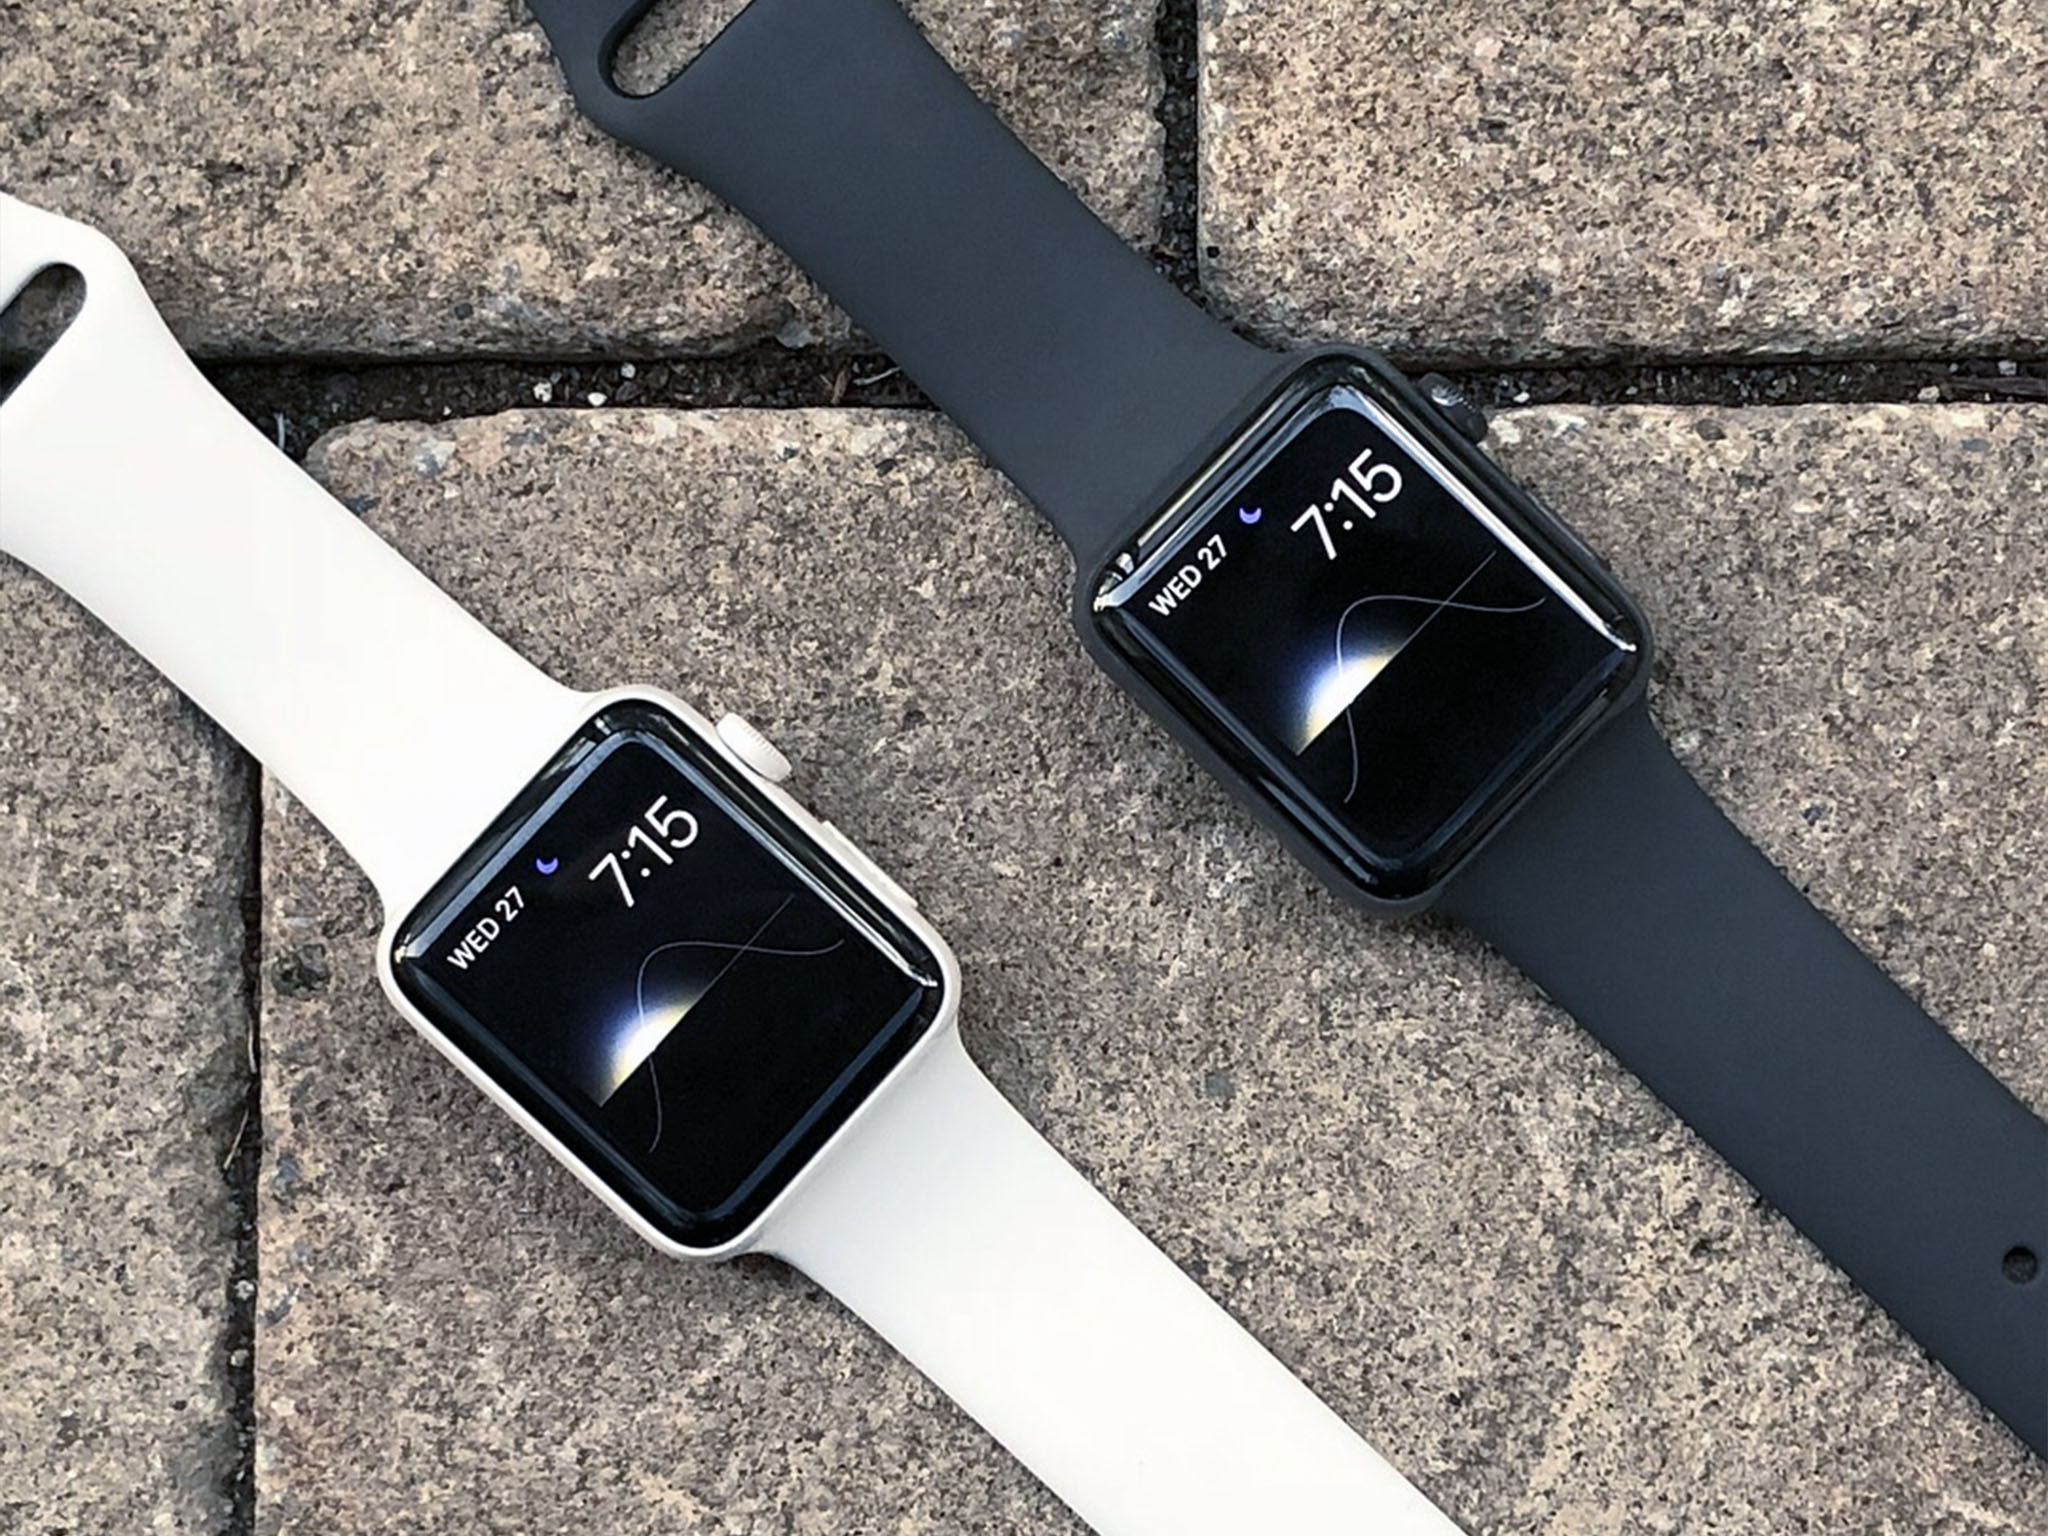 iwatch series 3 space gray aluminum